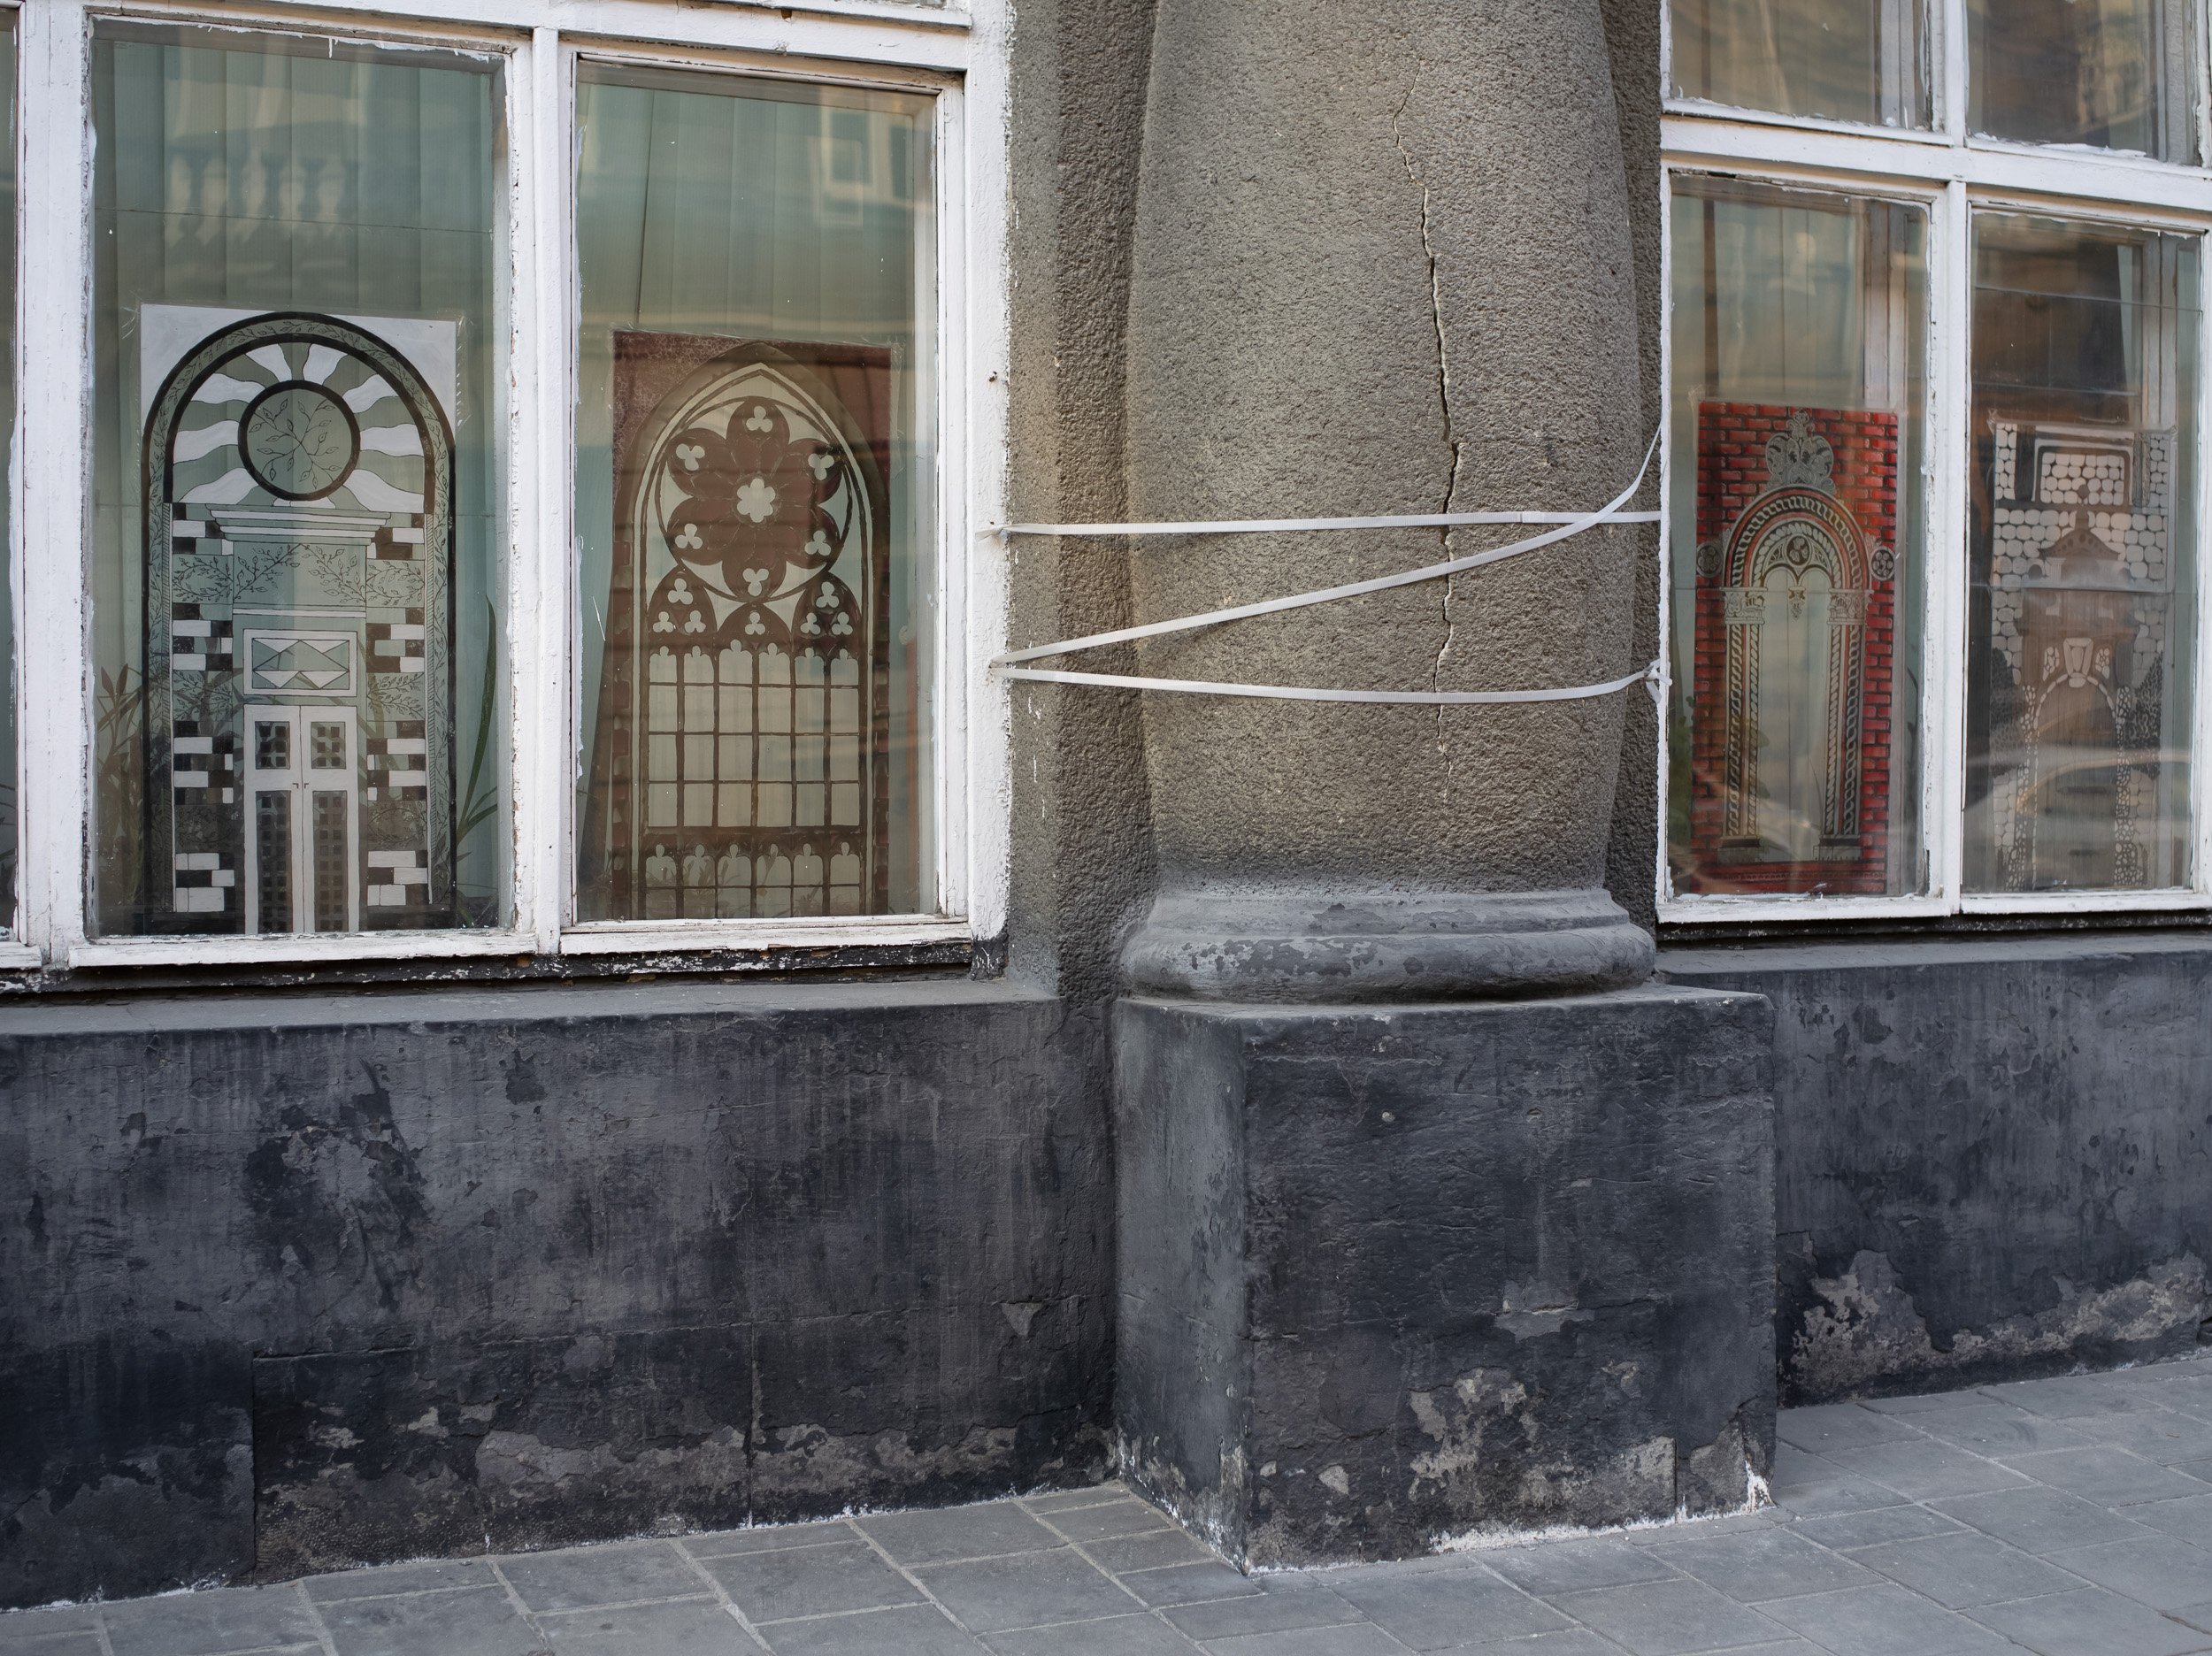 16th day of the war in Lviv, Ukraine by Vitaliy Galanzha